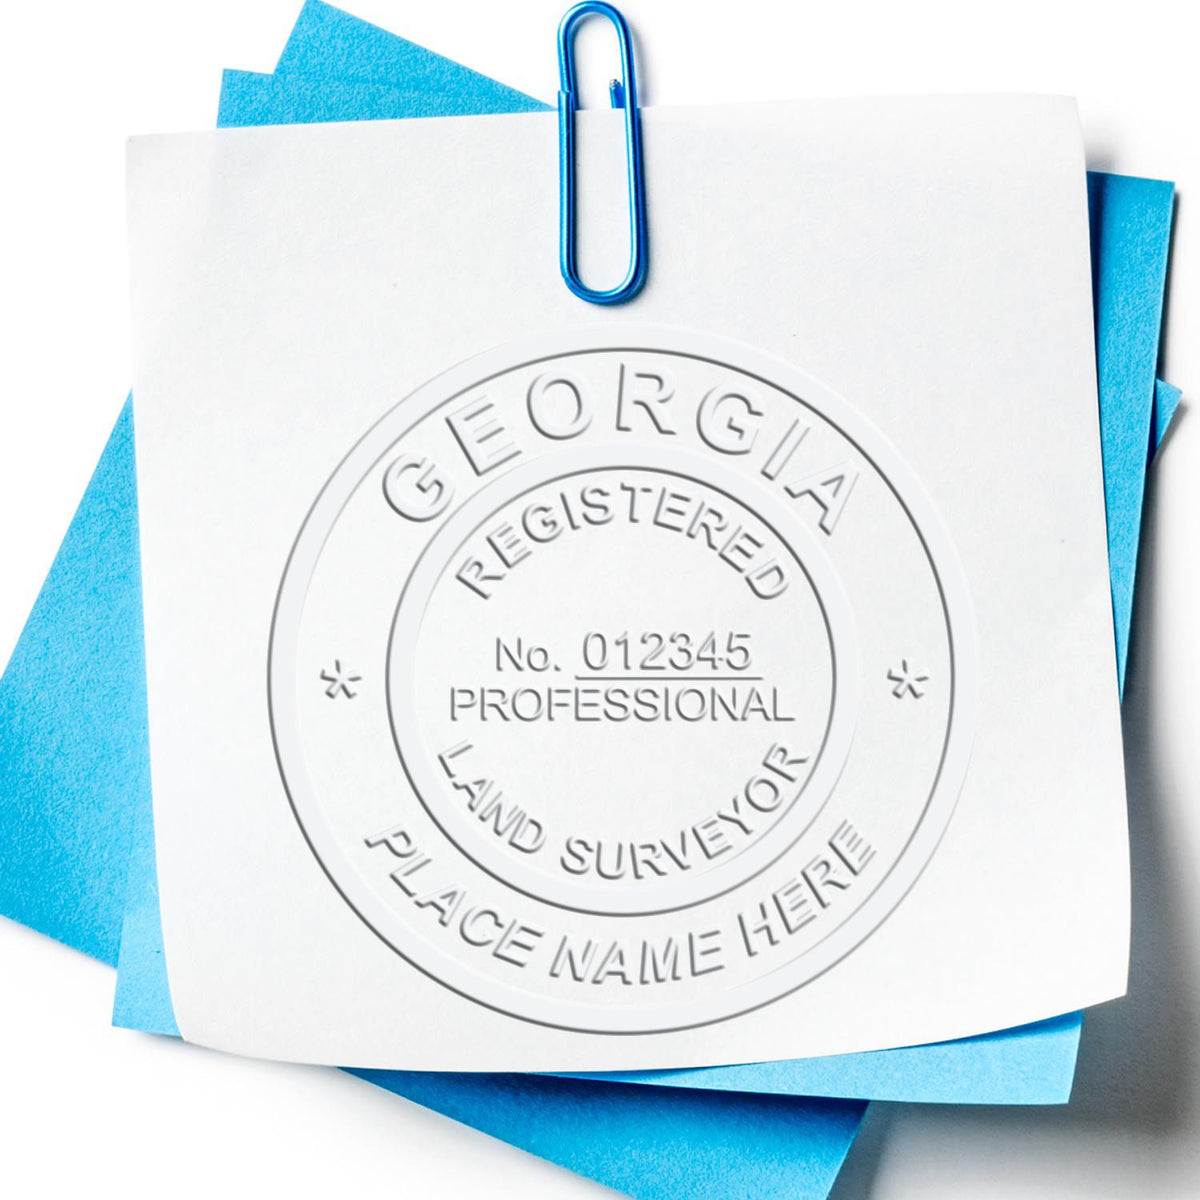 An in use photo of the Hybrid Georgia Land Surveyor Seal showing a sample imprint on a cardstock